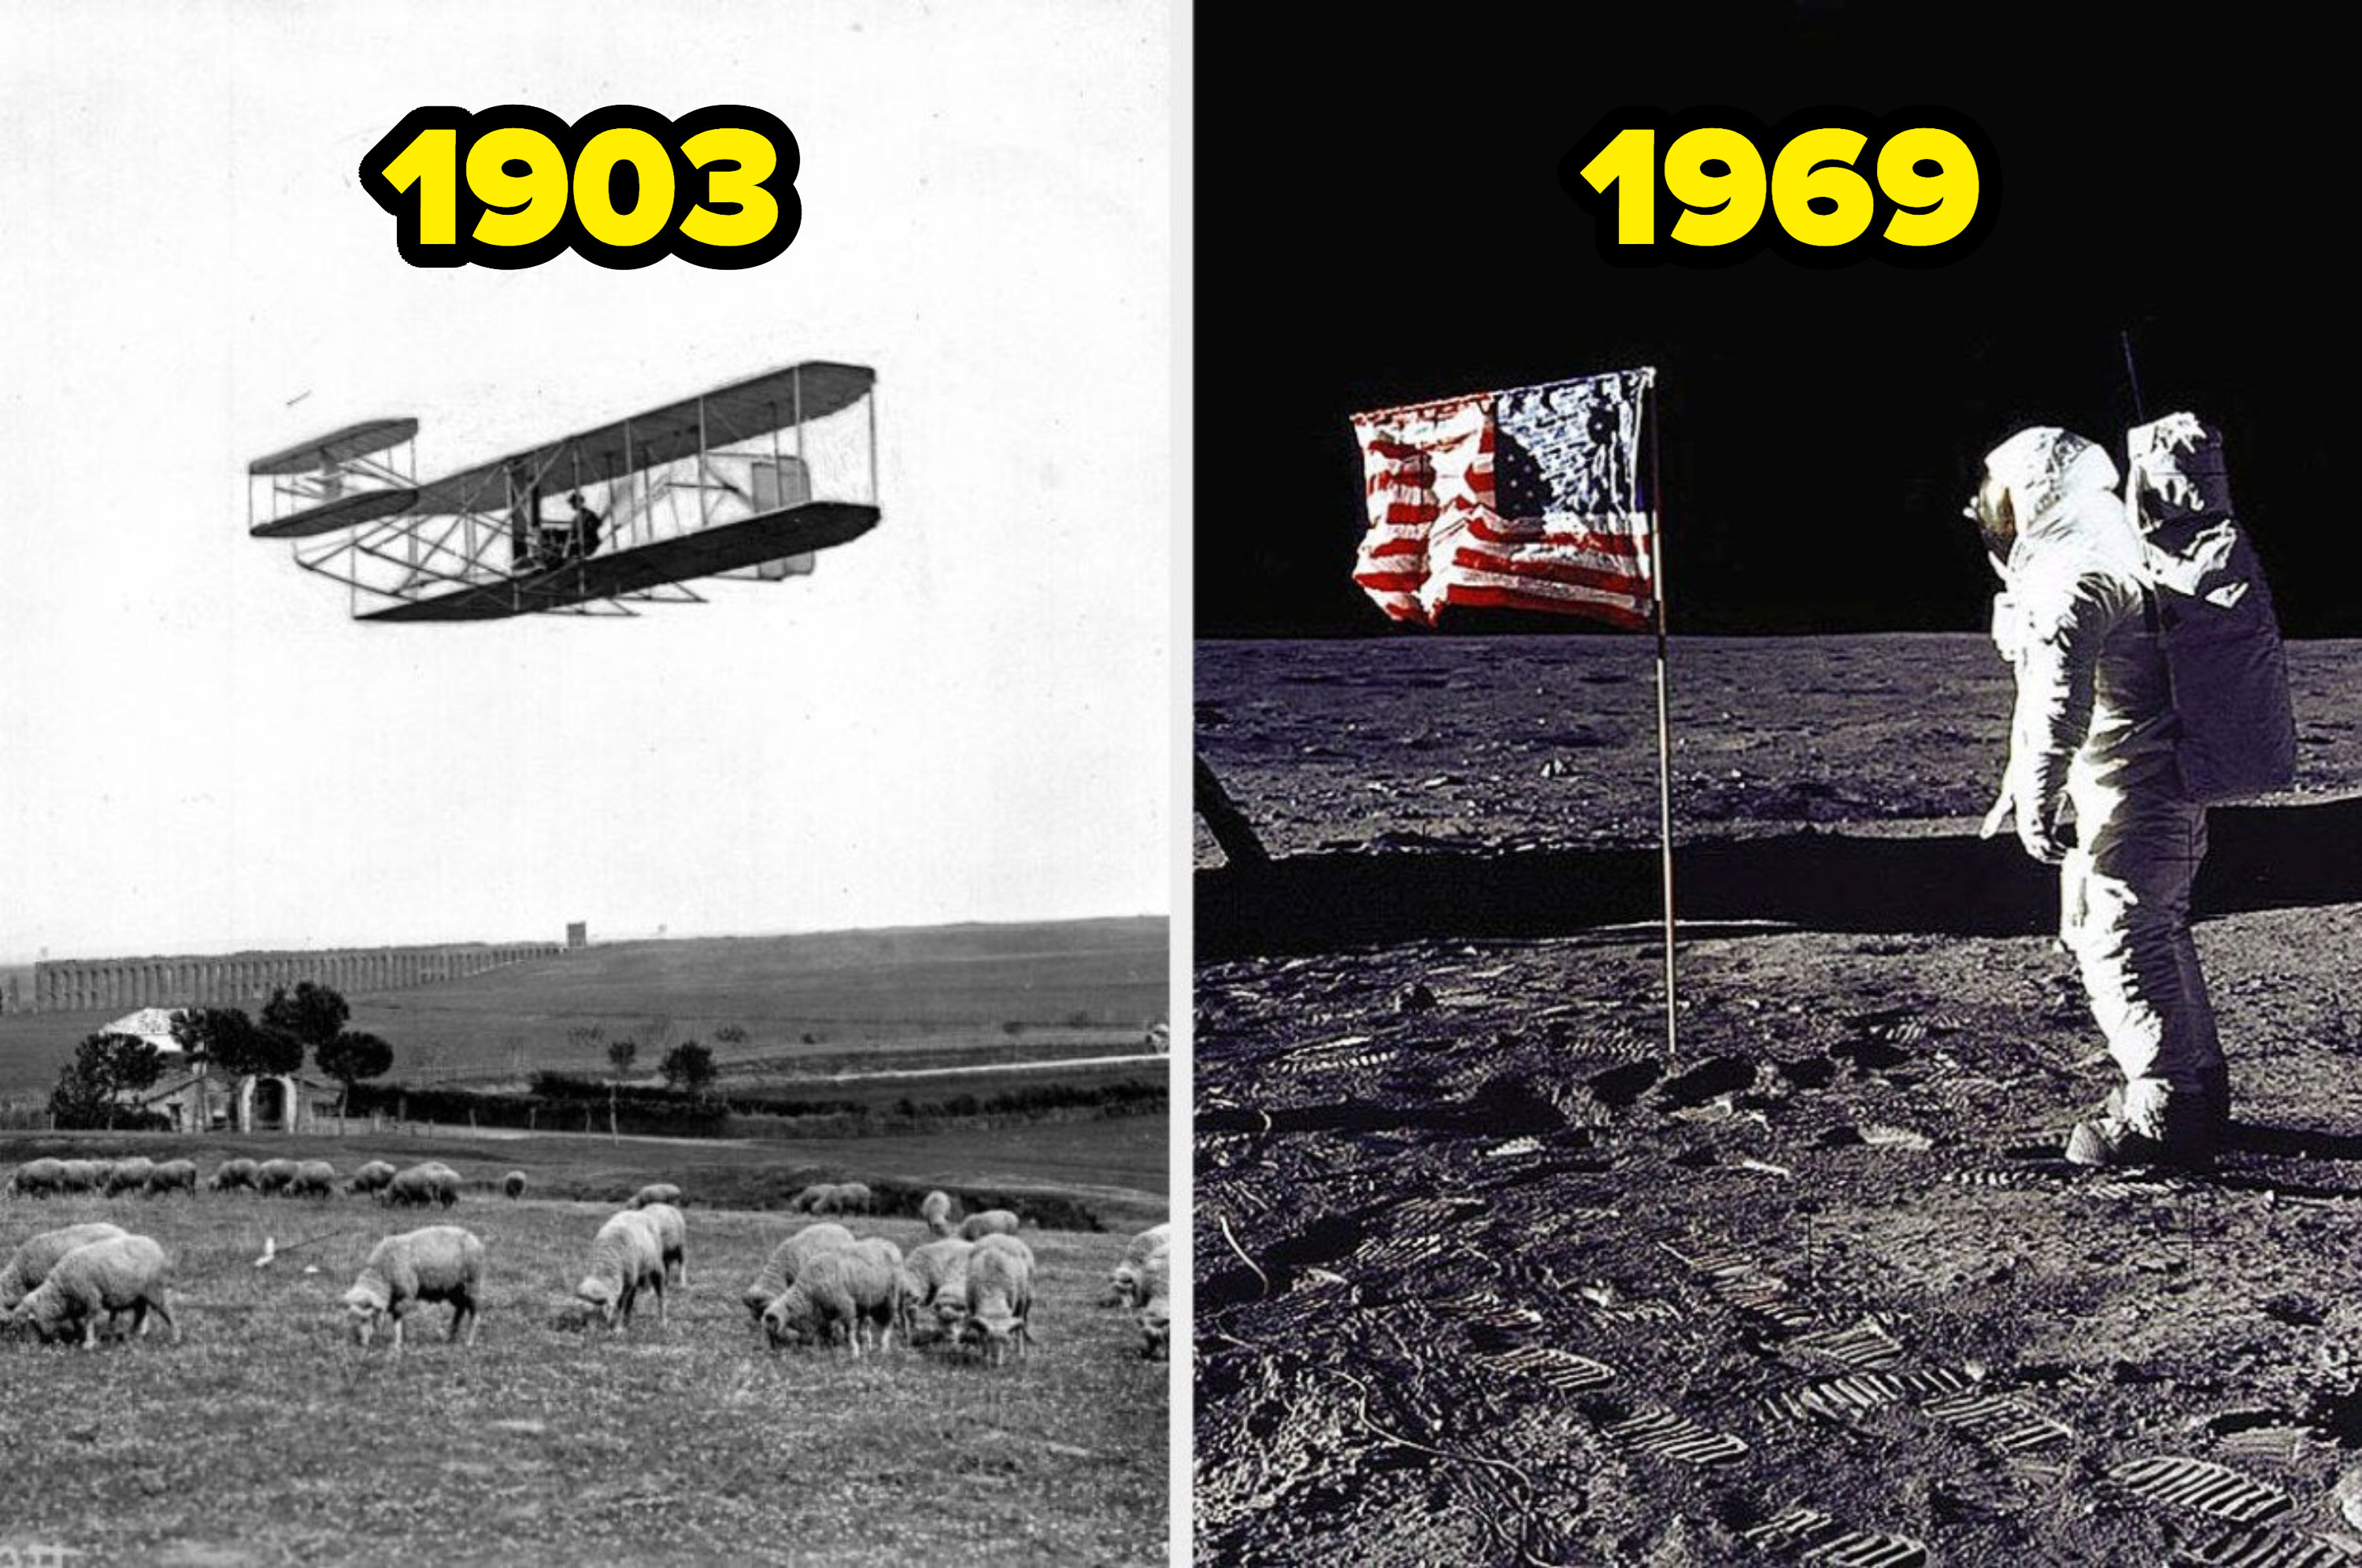 One of the first planes flying and Buzz Aldrin on the moon